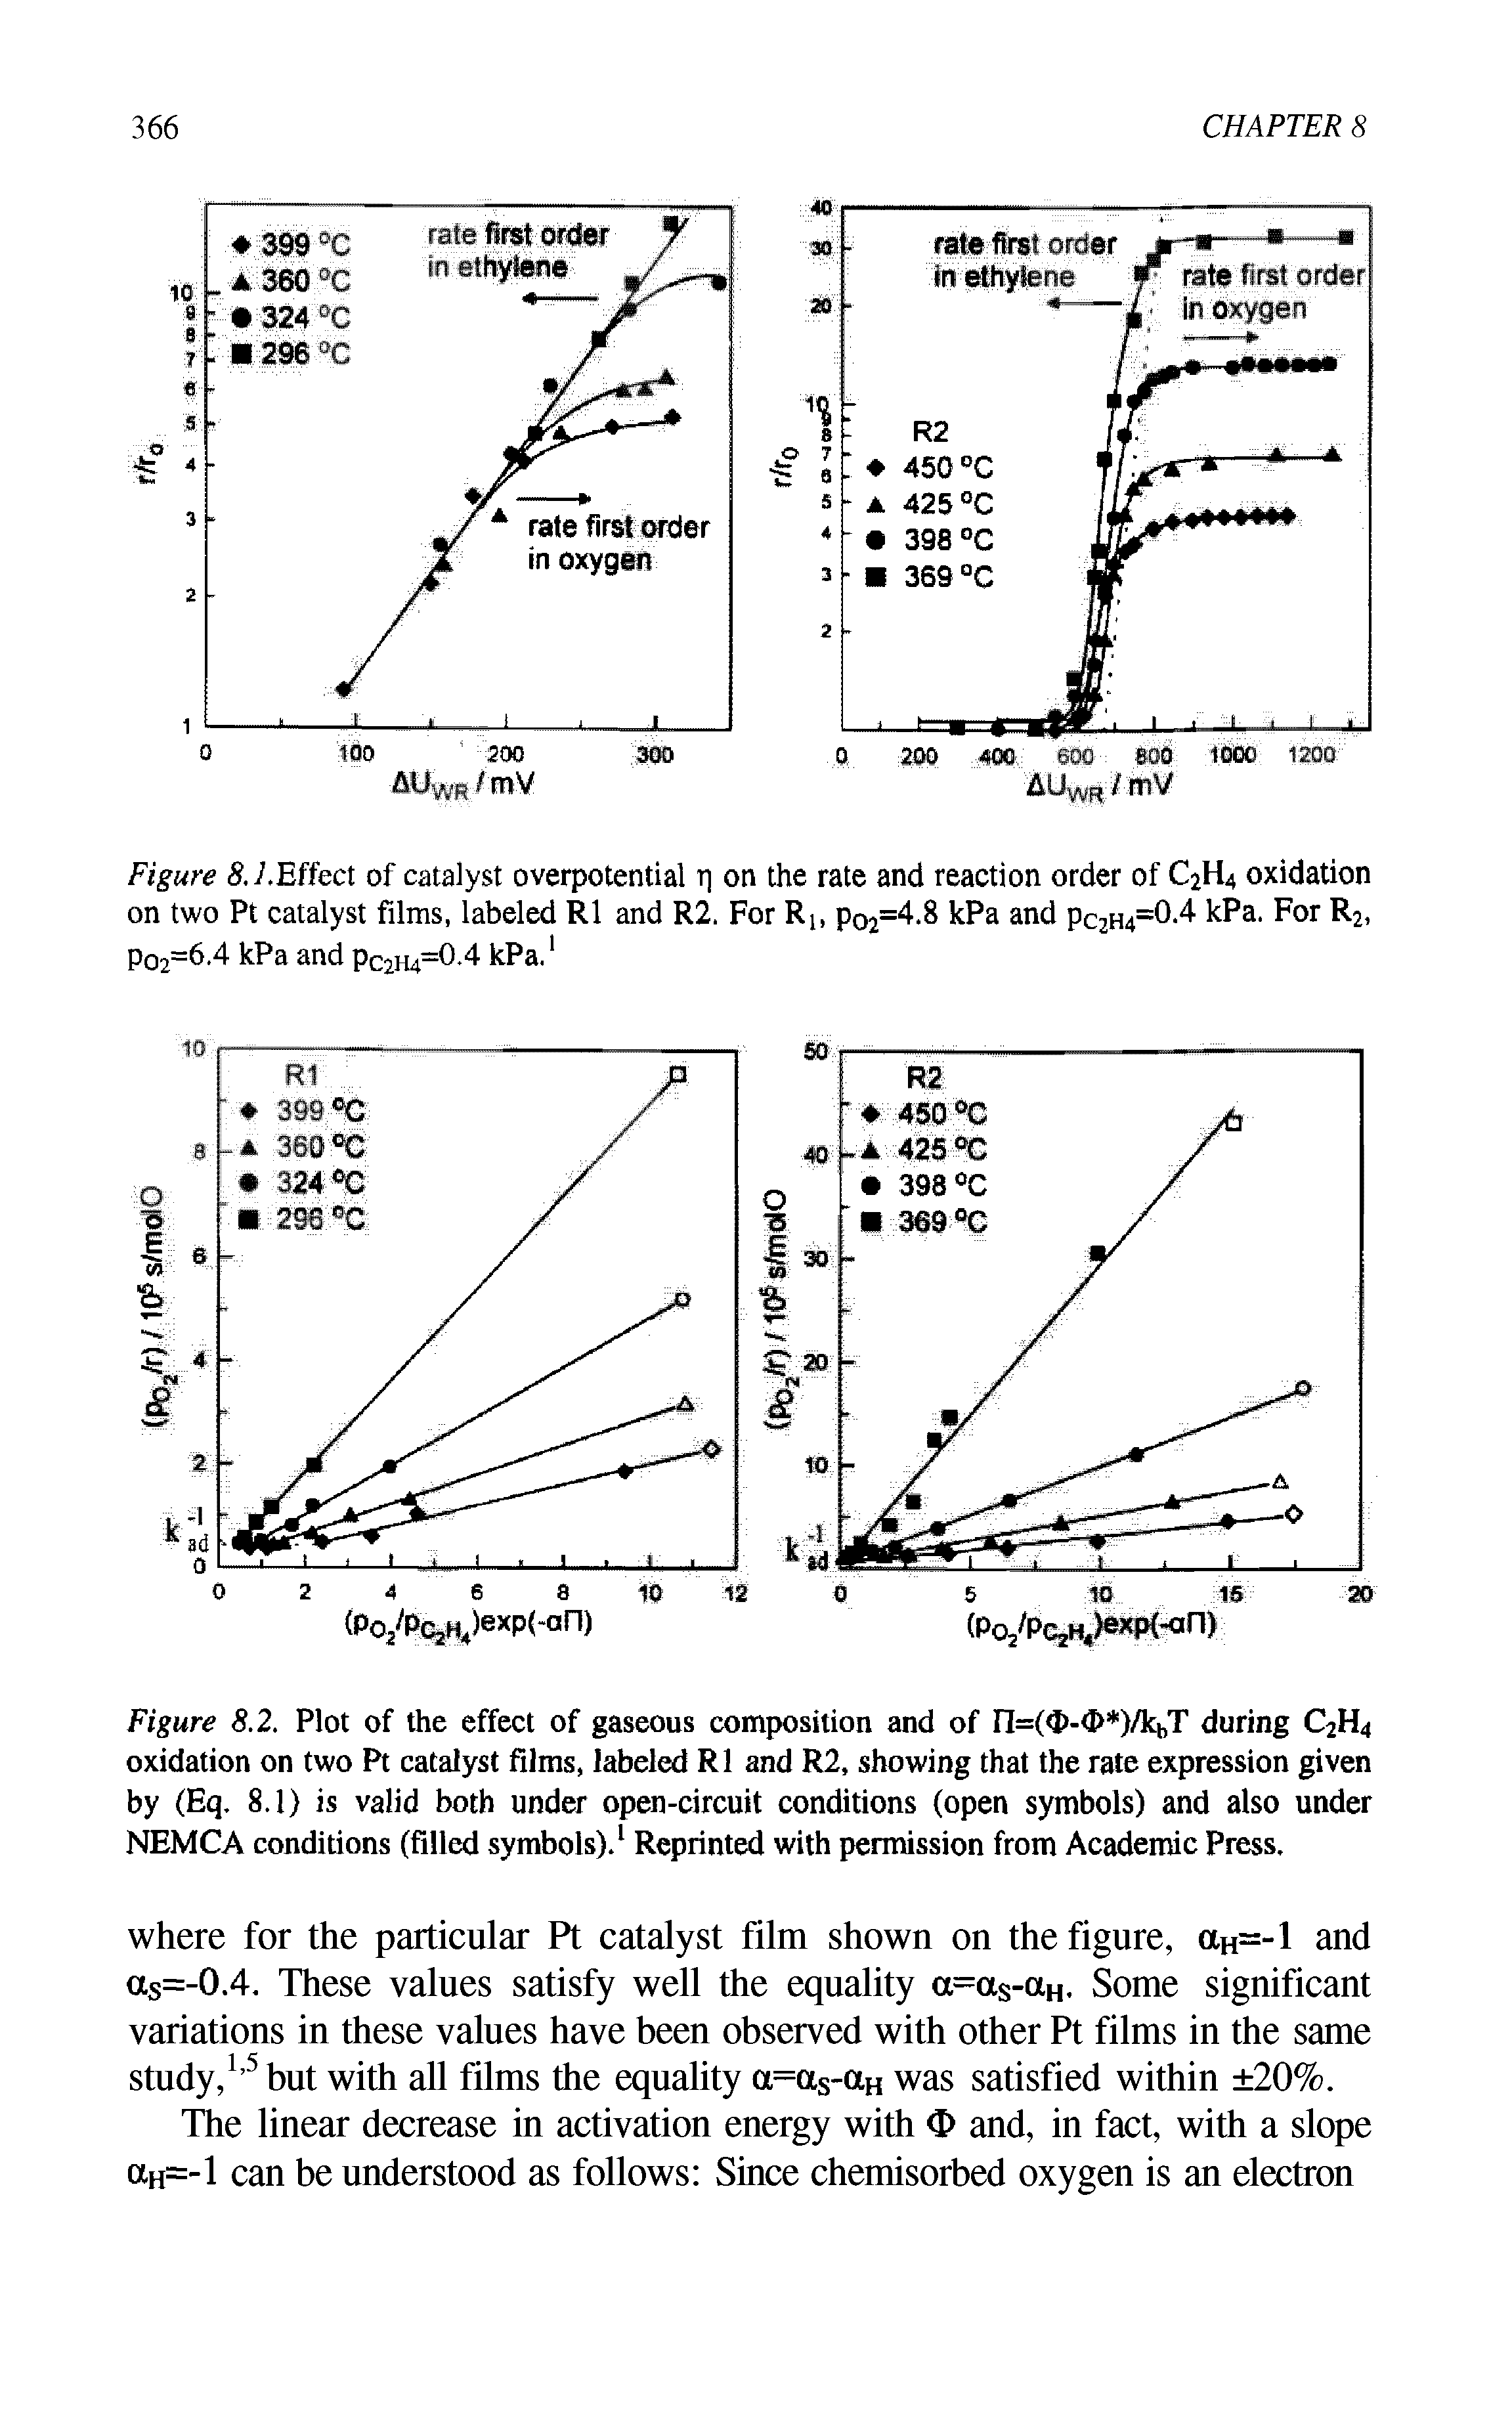 Figure 8.2. Plot of the effect of gaseous composition and of n=(<P-<I> )/kbT during C2H4 oxidation on two Pt catalyst films, labeled R1 and R2, showing that the rate expression given by (Eq. 8.1) is valid both under open-circuit conditions (open symbols) and also under NEMCA conditions (filled symbols).1 Reprinted with permission from Academic Press.